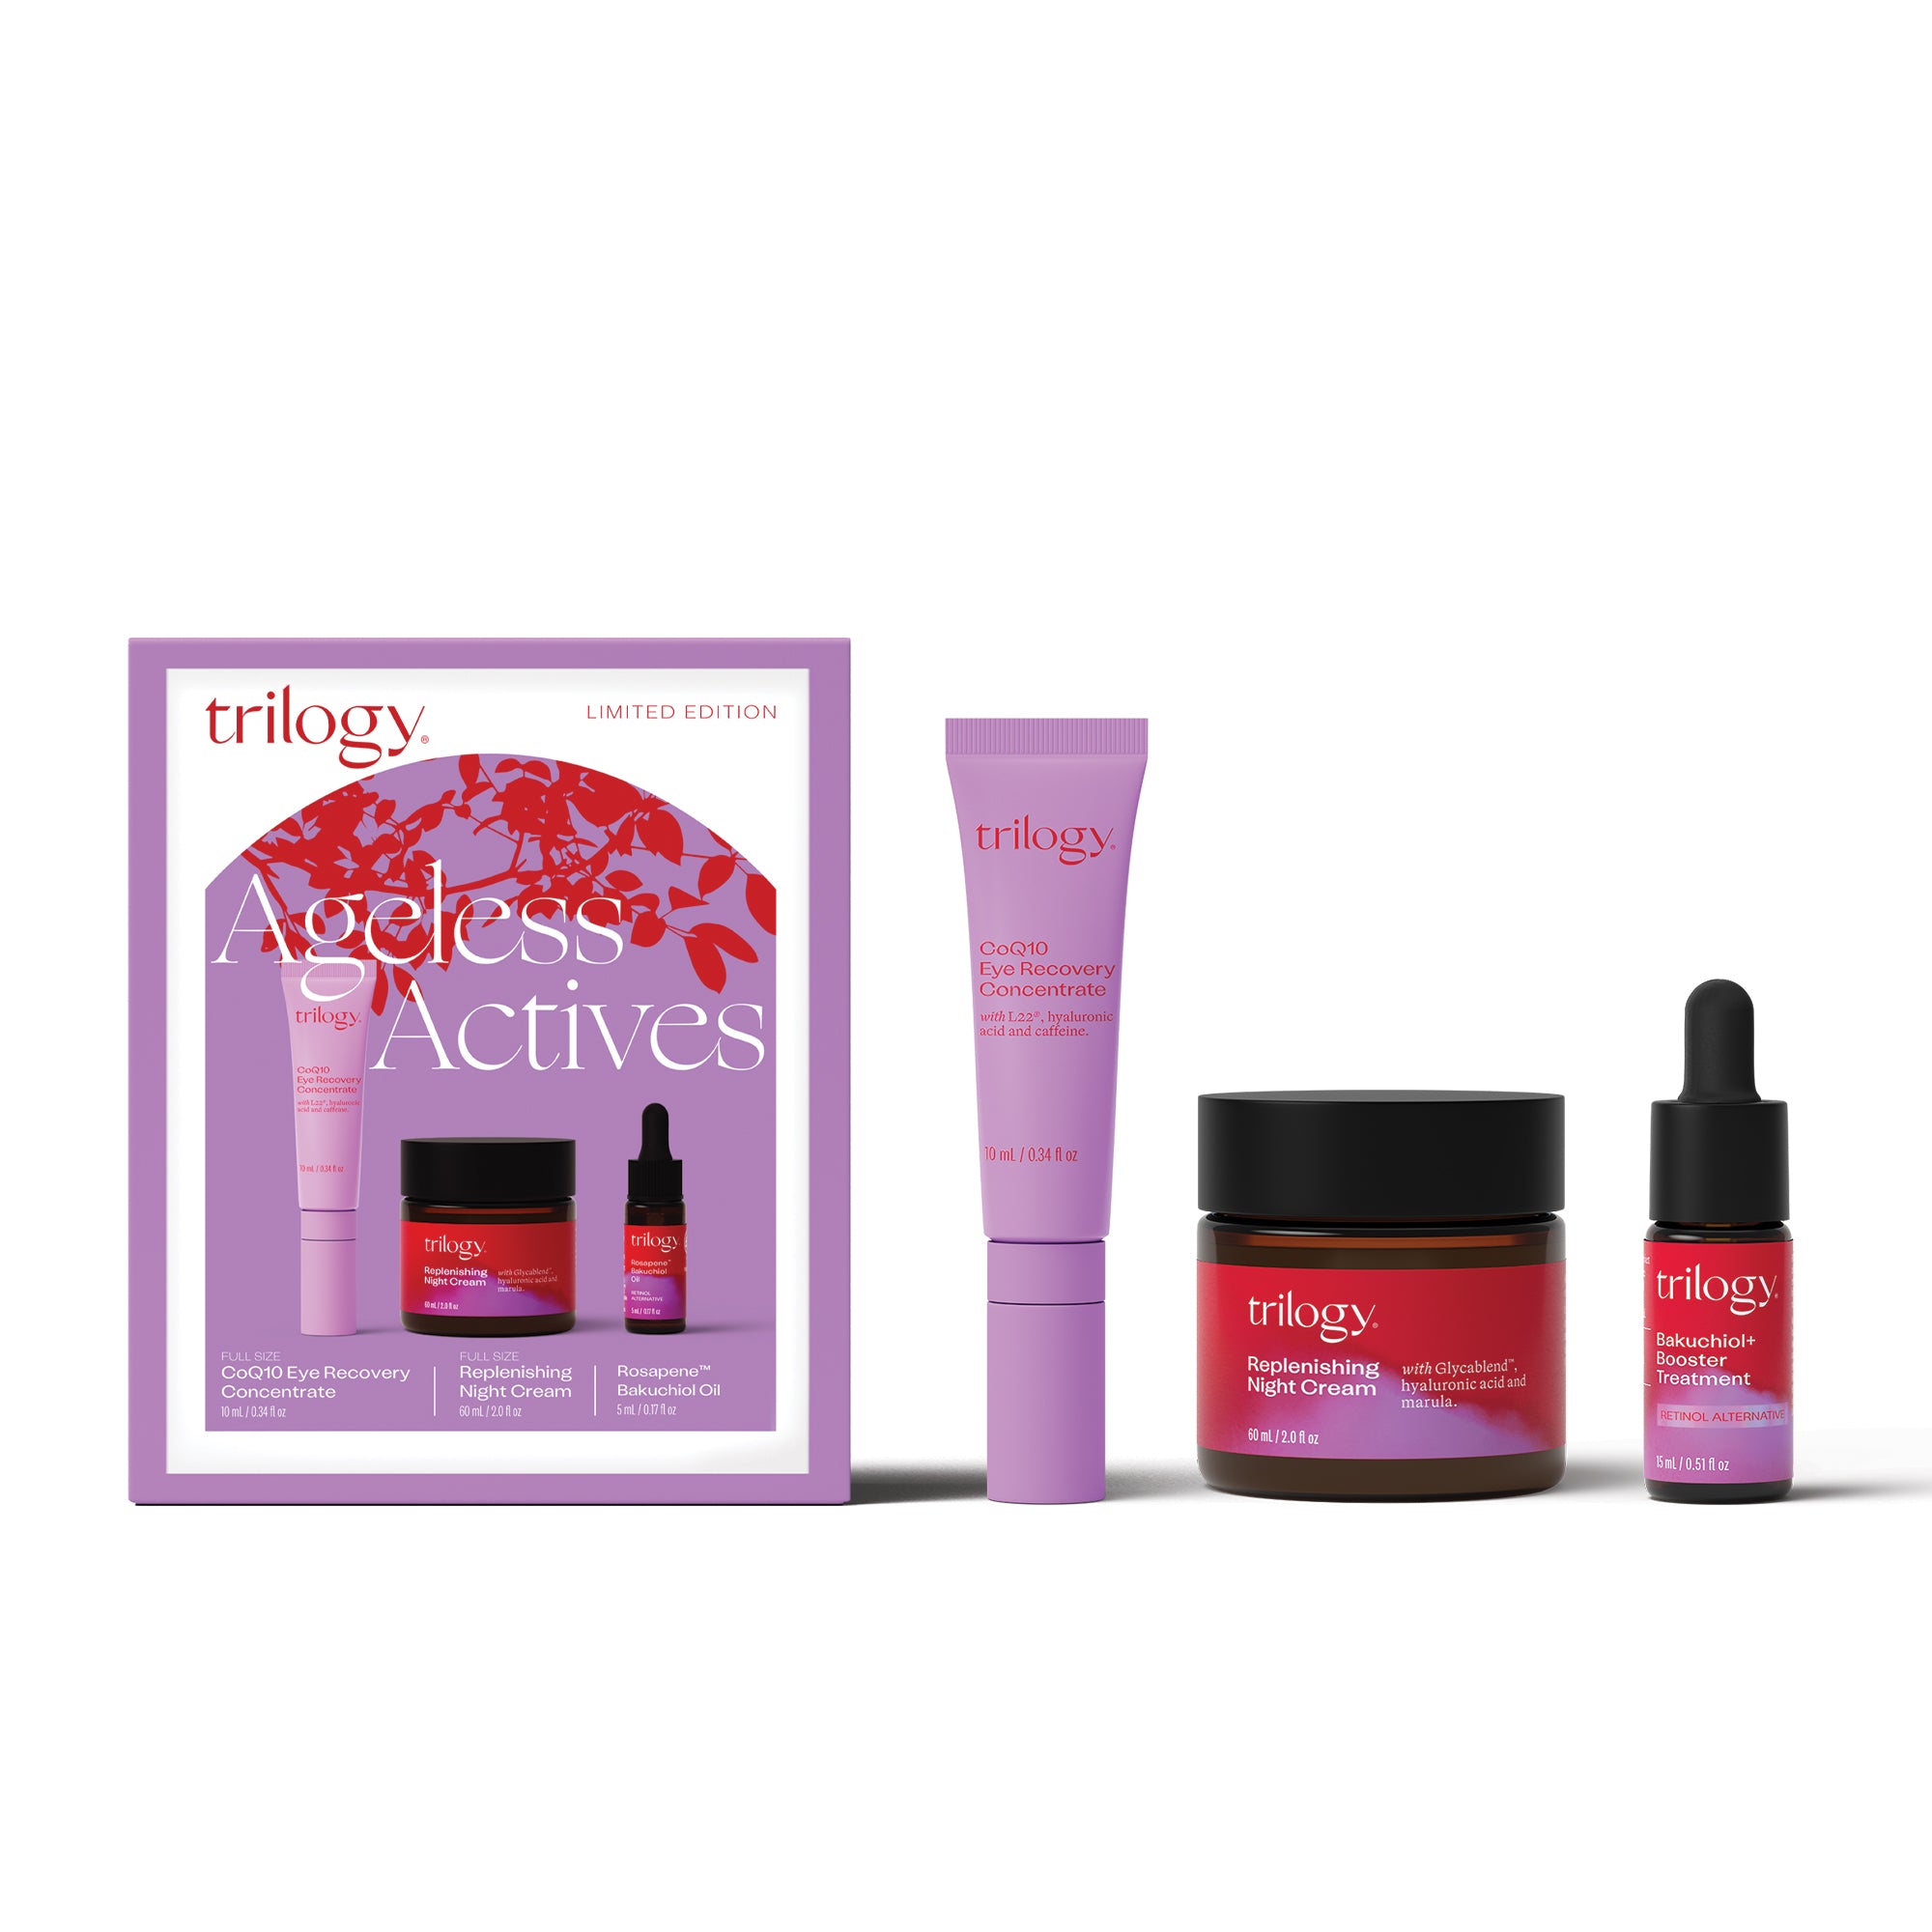 Limited Edition Ageless Actives Set